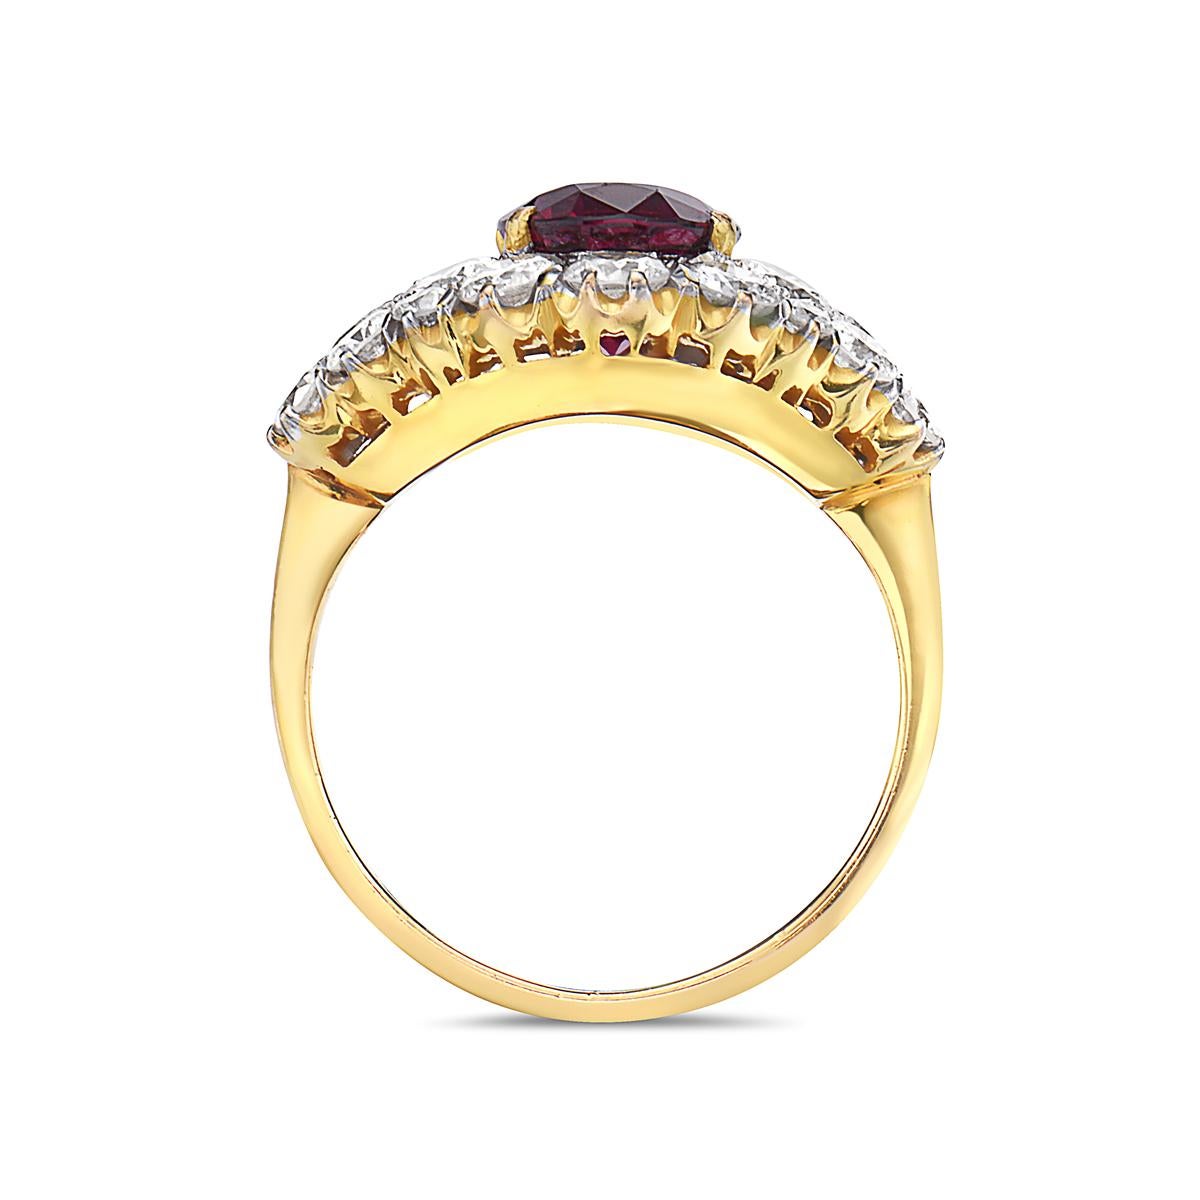 This ring features a 2.65 carat ruby center stone and 24 round brilliant diamonds weighing 2.50 carats set in 18K yellow gold. Made in Italy. Size 5 3/4.

Resizeable upon request.

Viewings available in our NYC showroom by appointment.